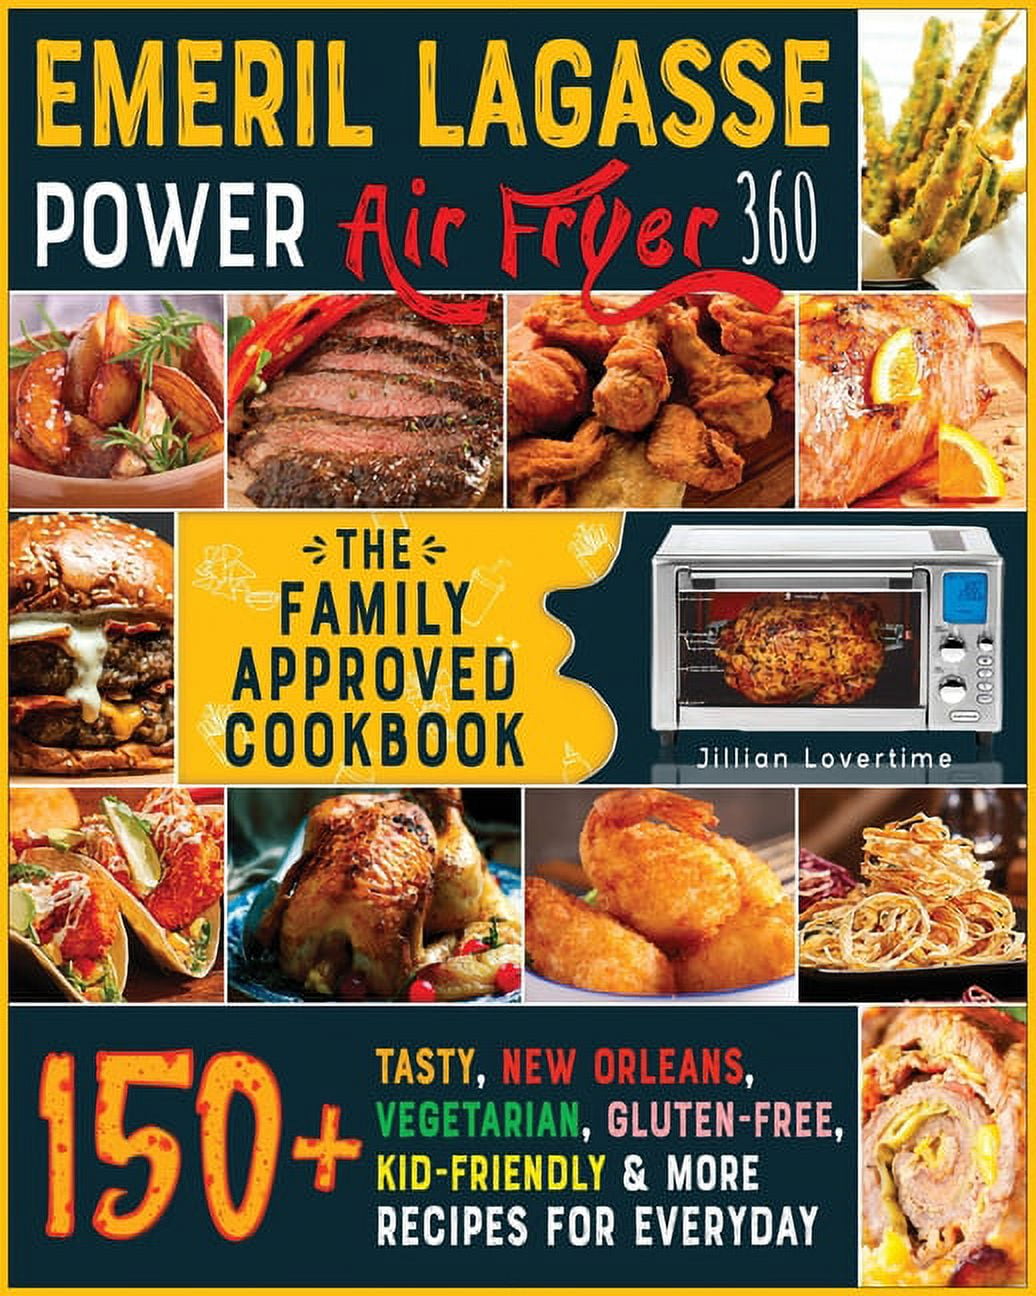 Stream [Read Pdf] 📚 Emeril Lagasse 25-QT Dual Zone French Door 360 Air  Fryer Cookbook: 1200 Days Quick & by Goodheart